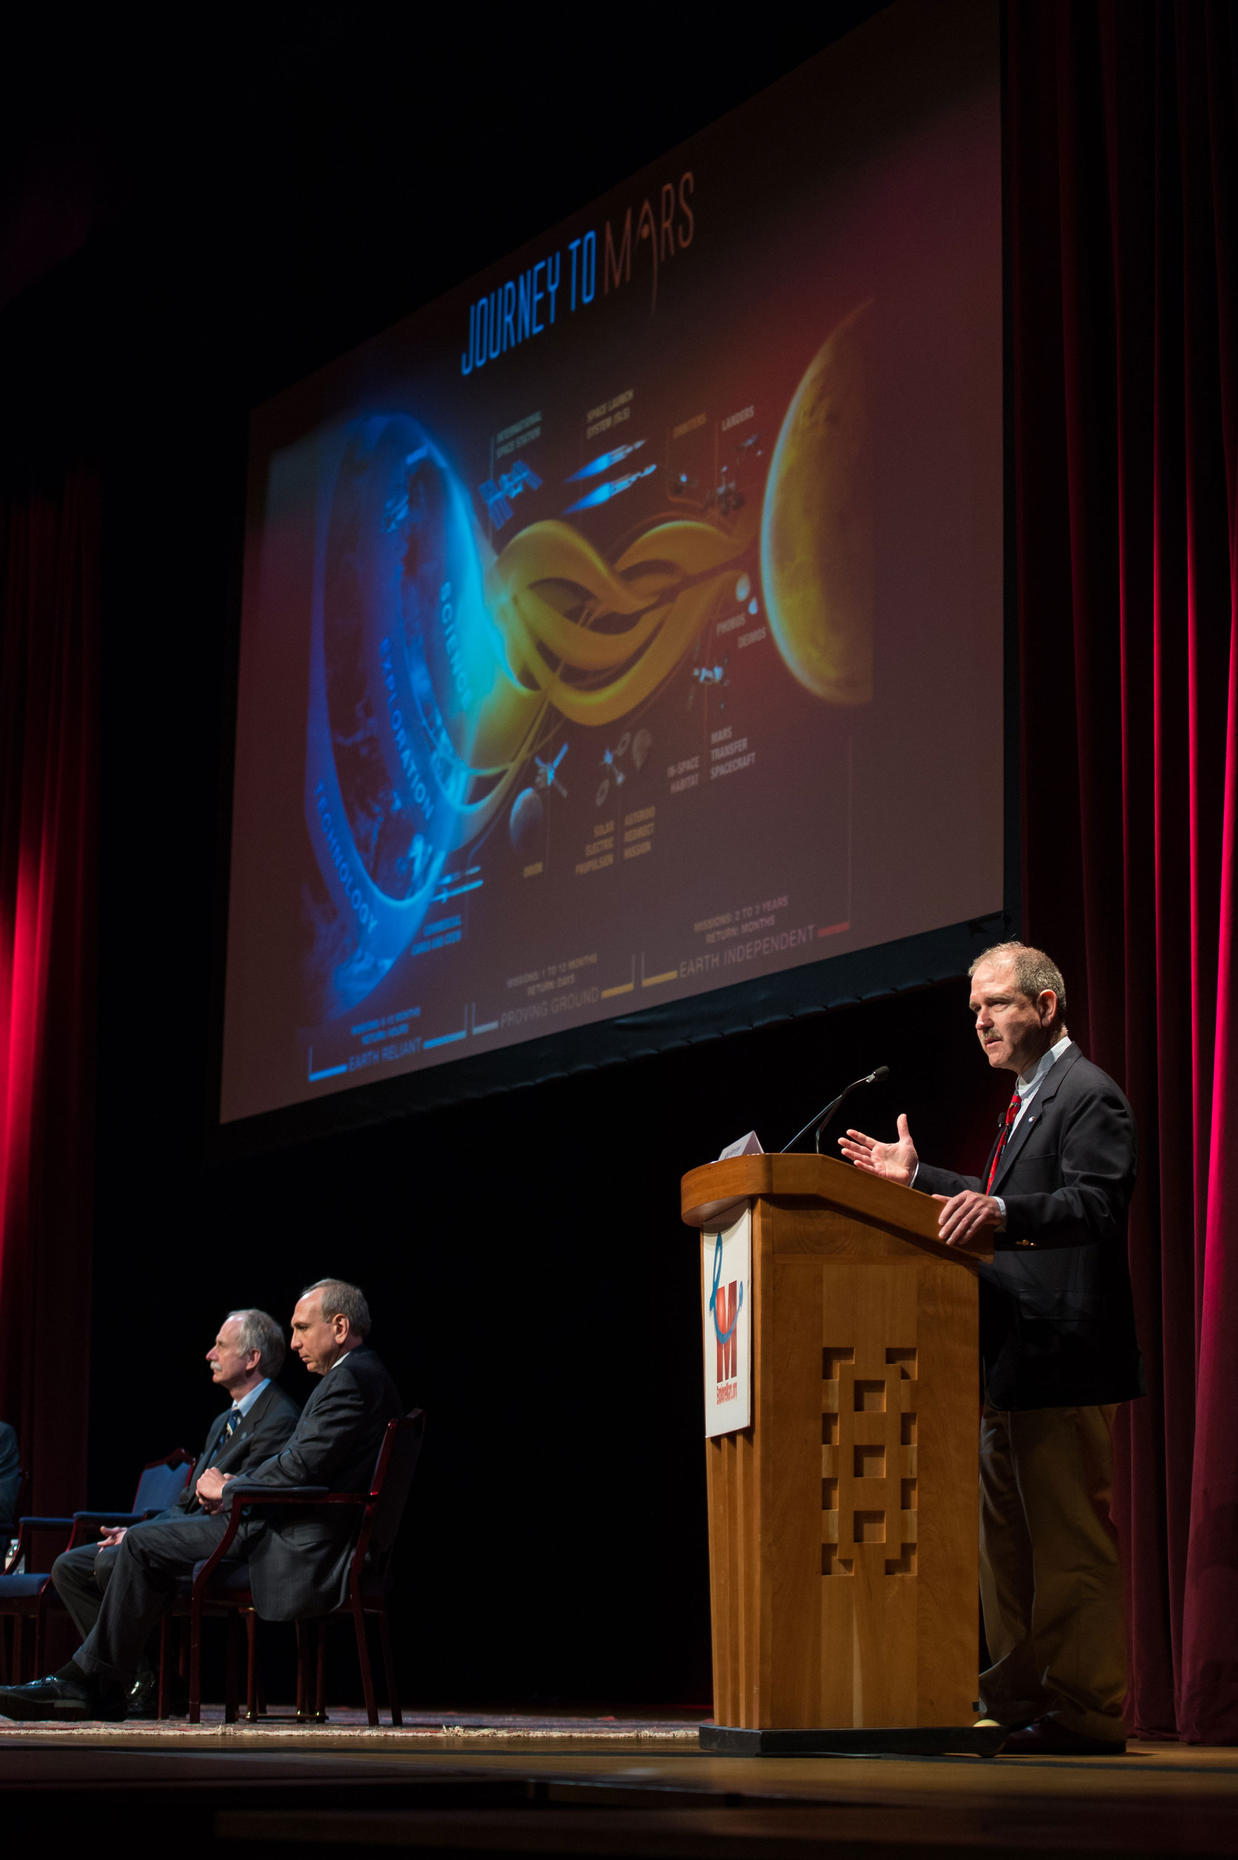 John Grunsfeld, Associate Administrator for NASA's Science Mission Directorate, describes the role of science in NASA's Journey to Mars.